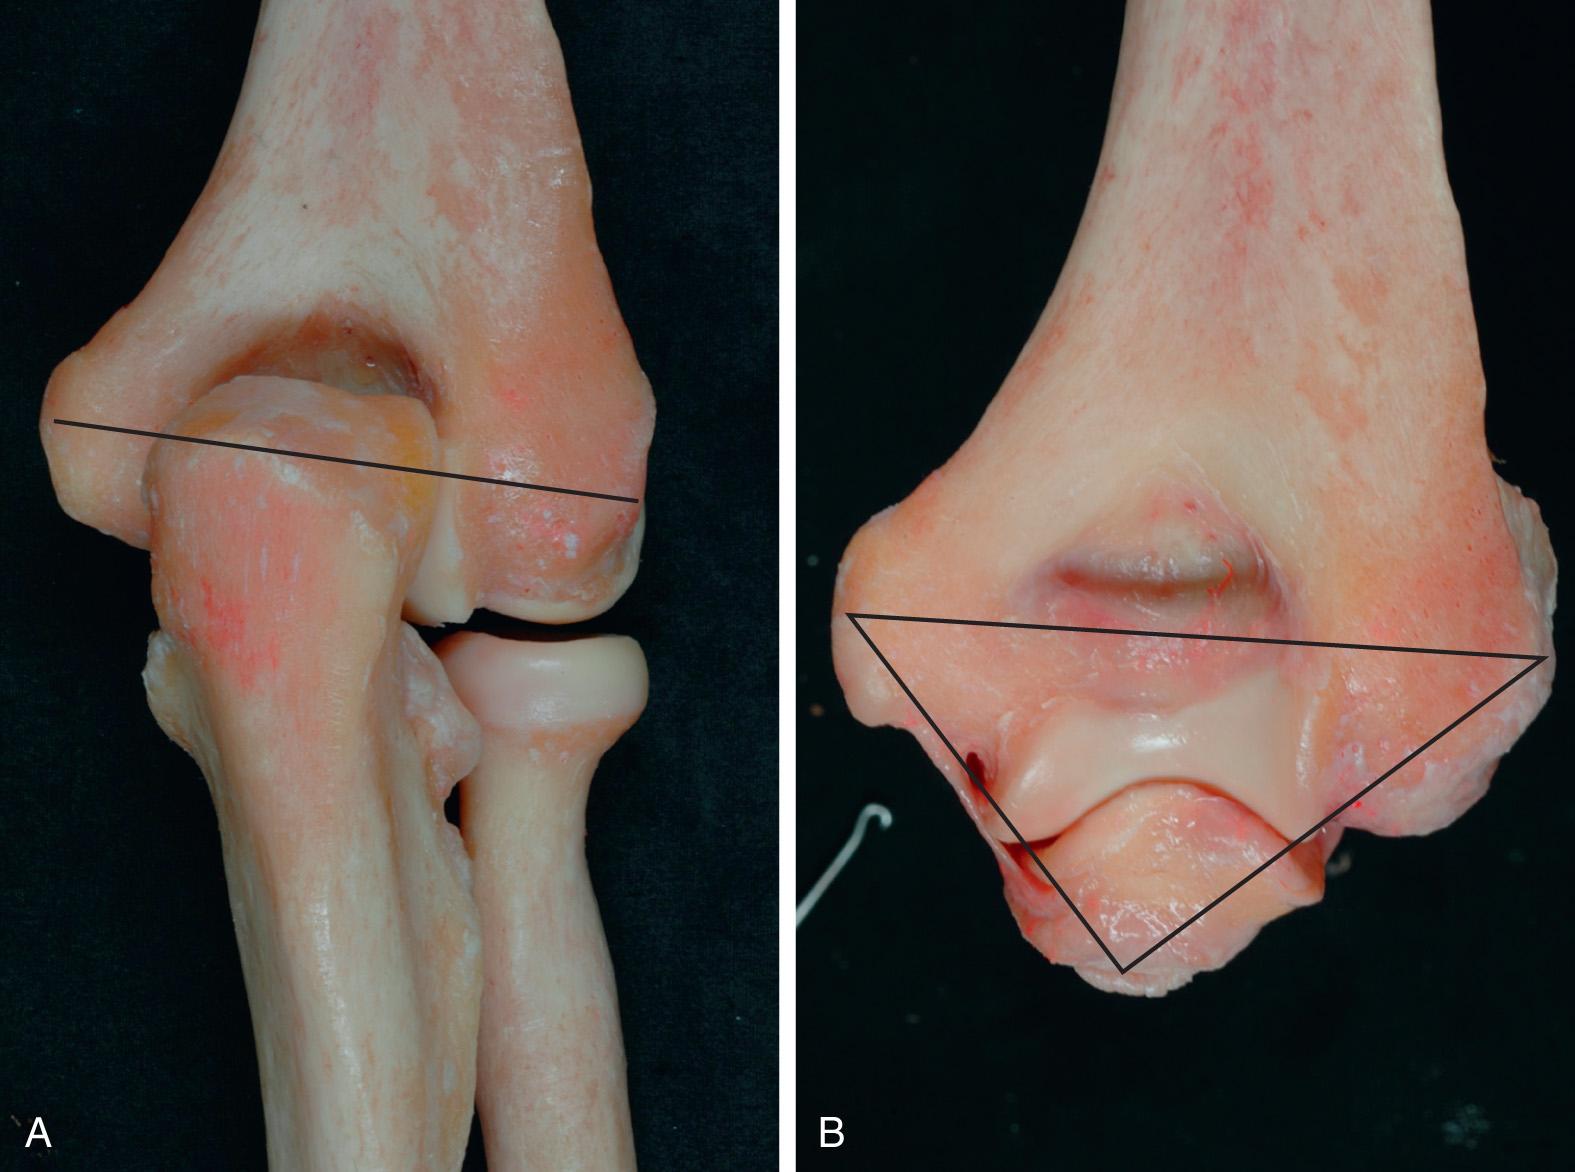 FIG 2.1, The palpable landmarks of the tip of the olecranon and the medial and lateral epicondyles are collinear with the elbow extended (A) and form an inverted triangle posteriorly when the elbow is flexed 90 degrees (B).